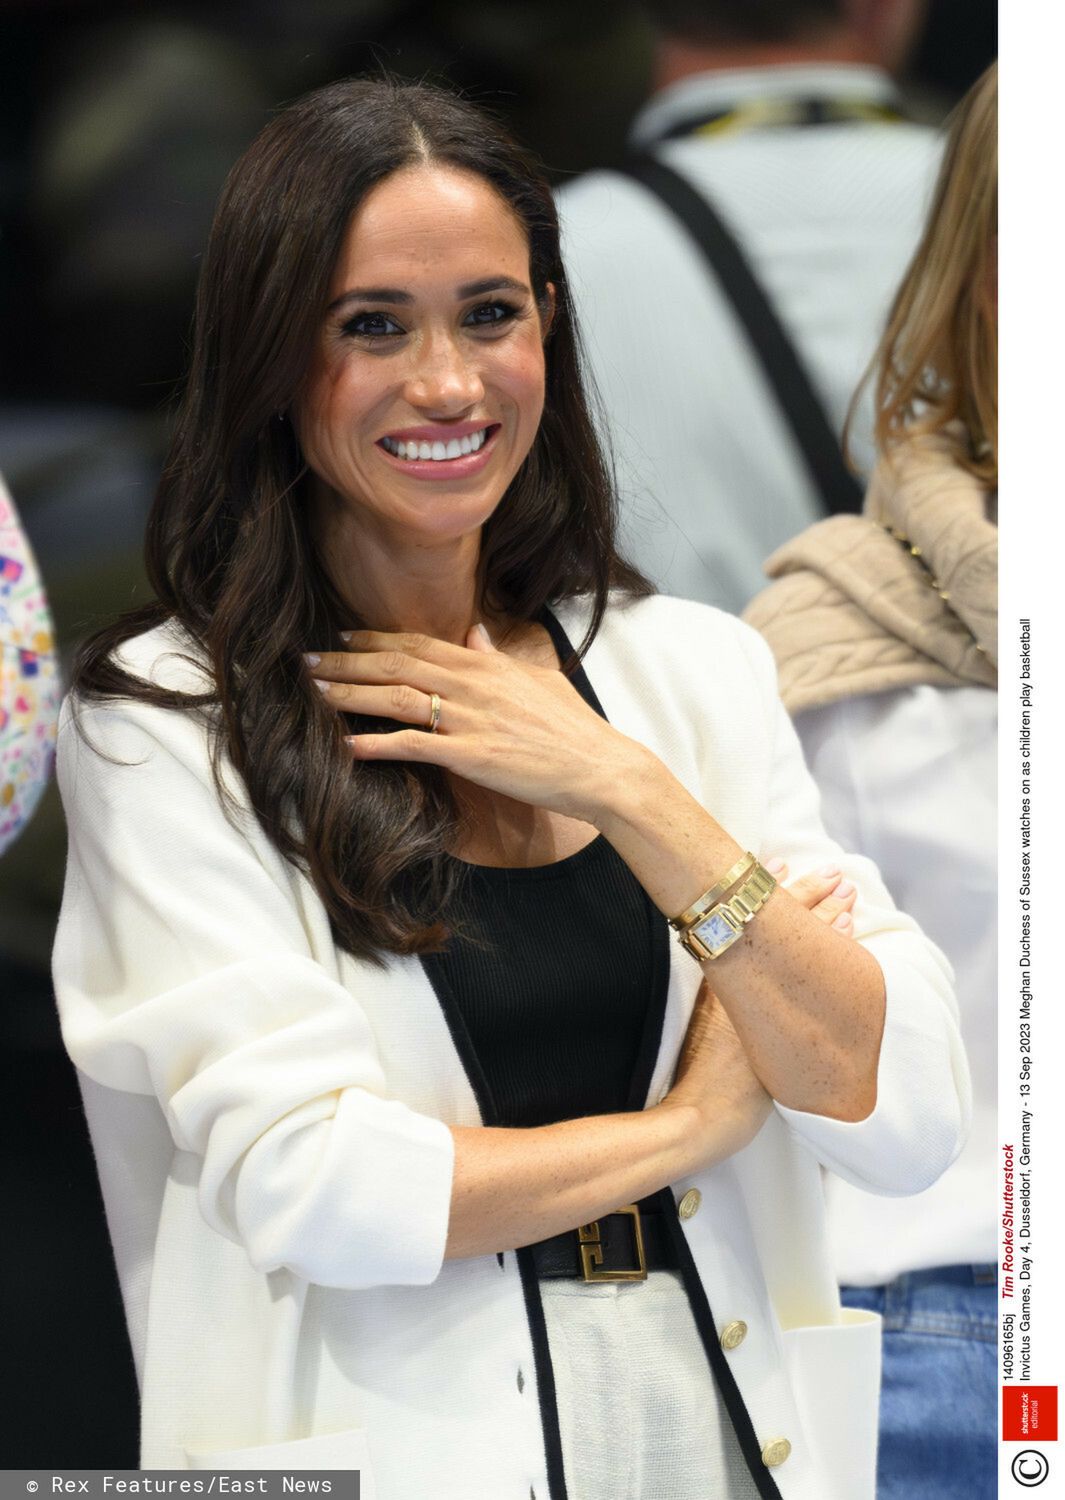 Mandatory Credit: Photo by Tim Rooke/Shutterstock (14096165bj)
Meghan Duchess of Sussex watches on as children play basketball

13 Sep 2023
Invictus Games, Day 4, Dusseldorf, Germany - 13 Sep 2023